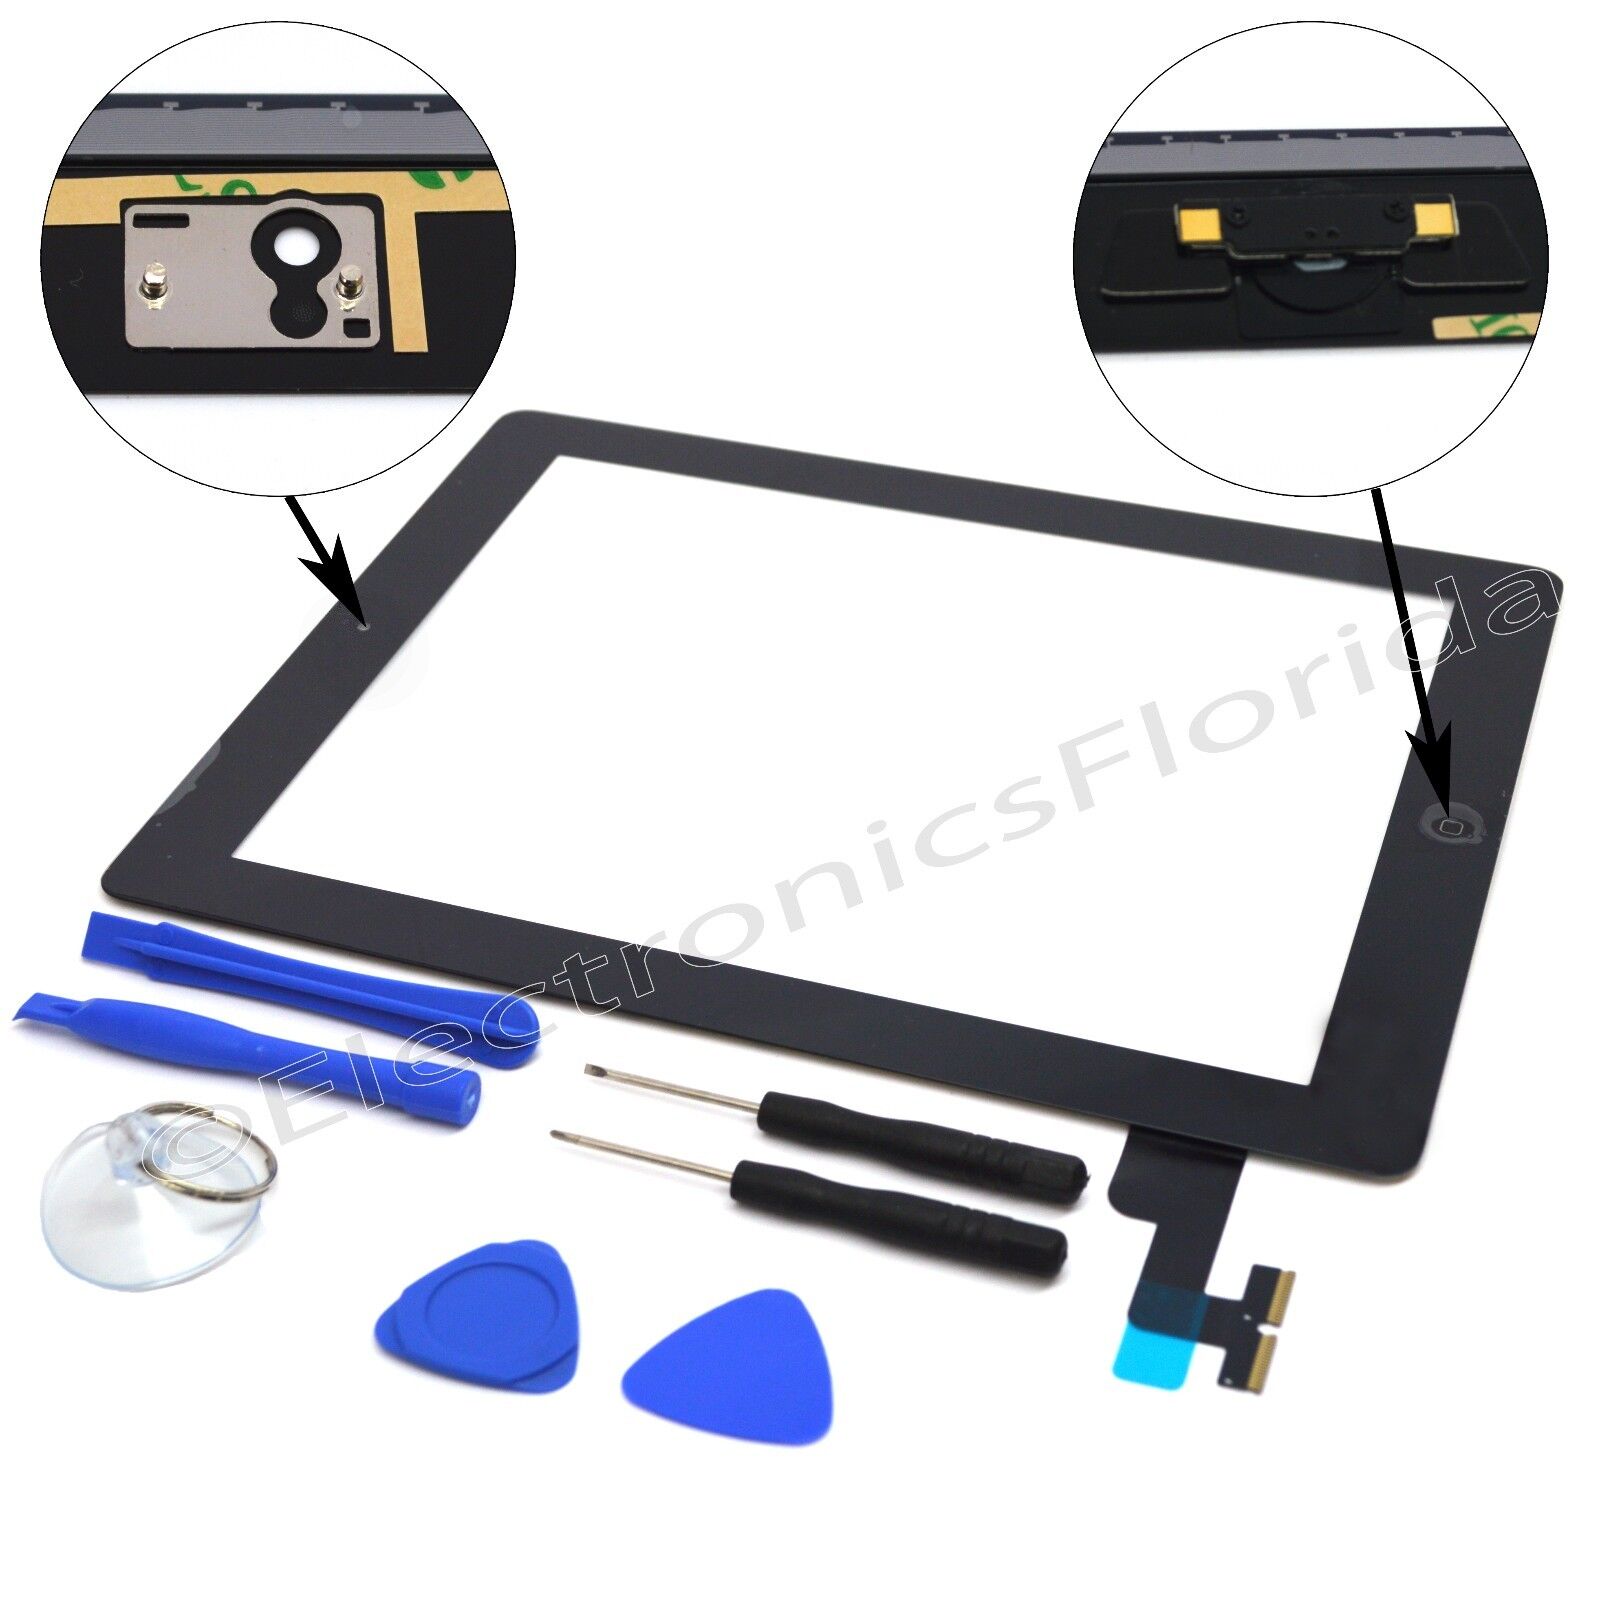 Touch Screen Digitizer Replacement For Apple iPad 2/3/4/ & Air  - Black / White eleFlorida b0025